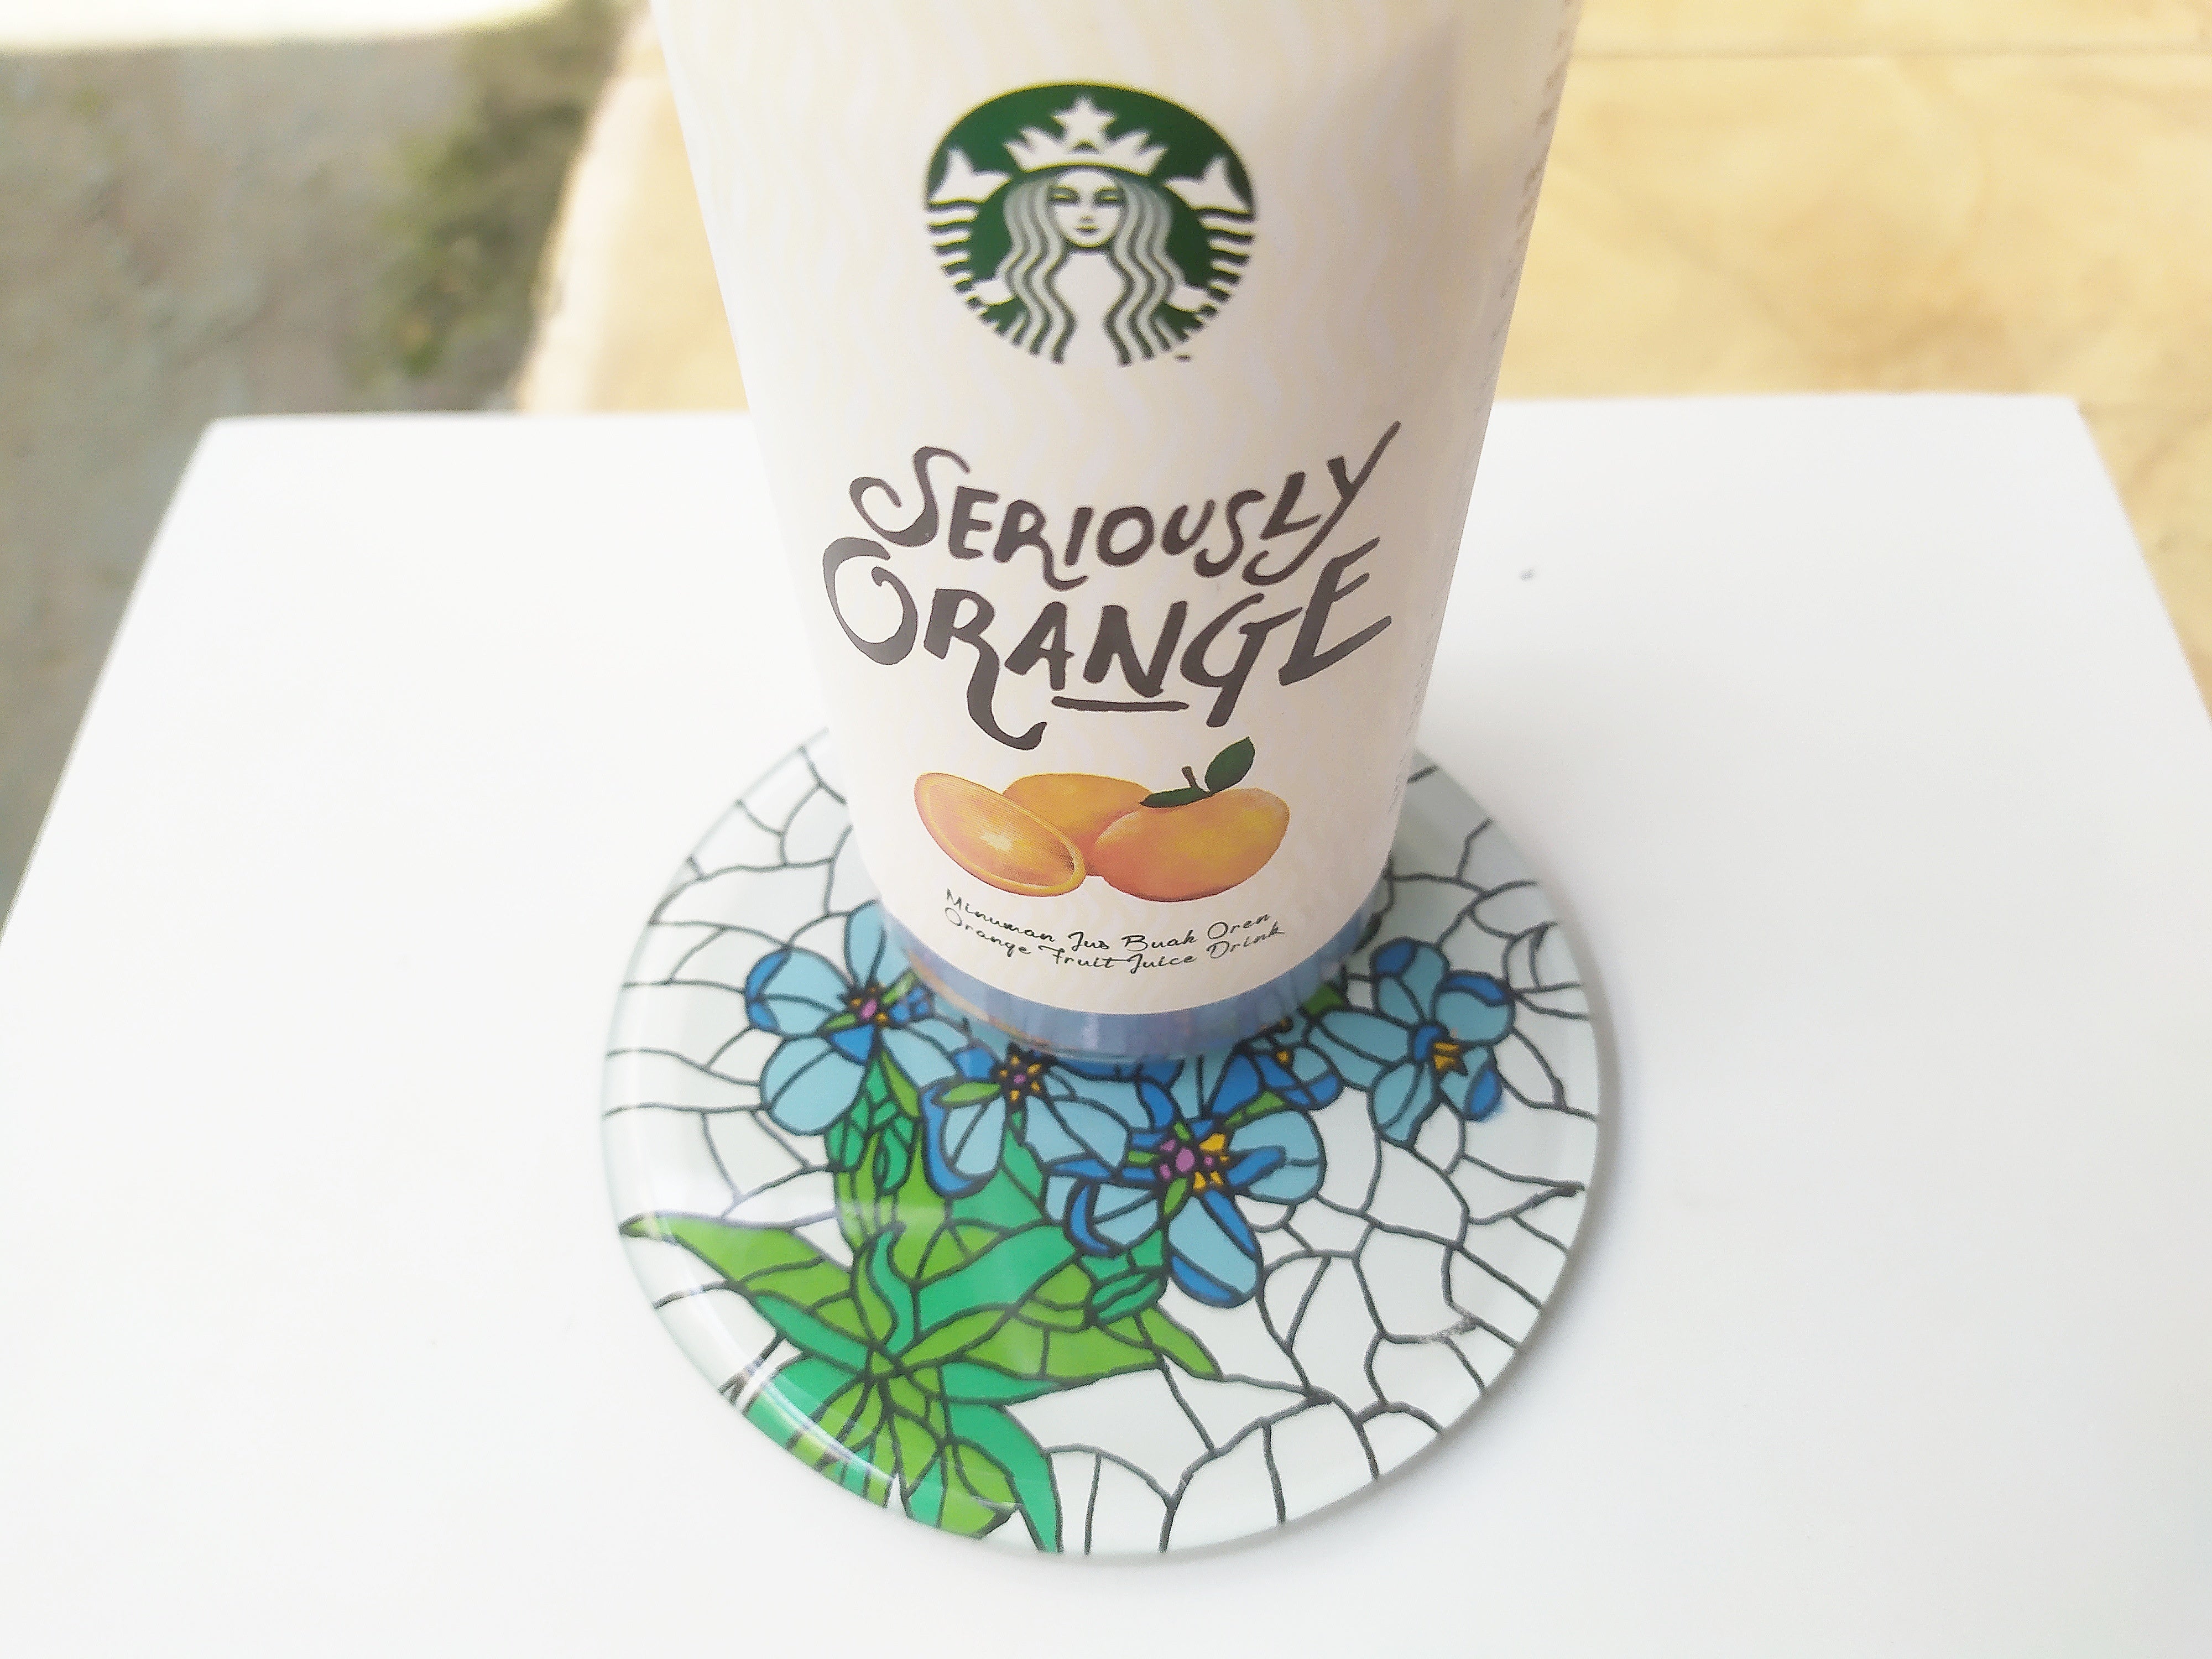 Hand Painted Blue Pansy Glory round mirror coaster , with starbucks cup